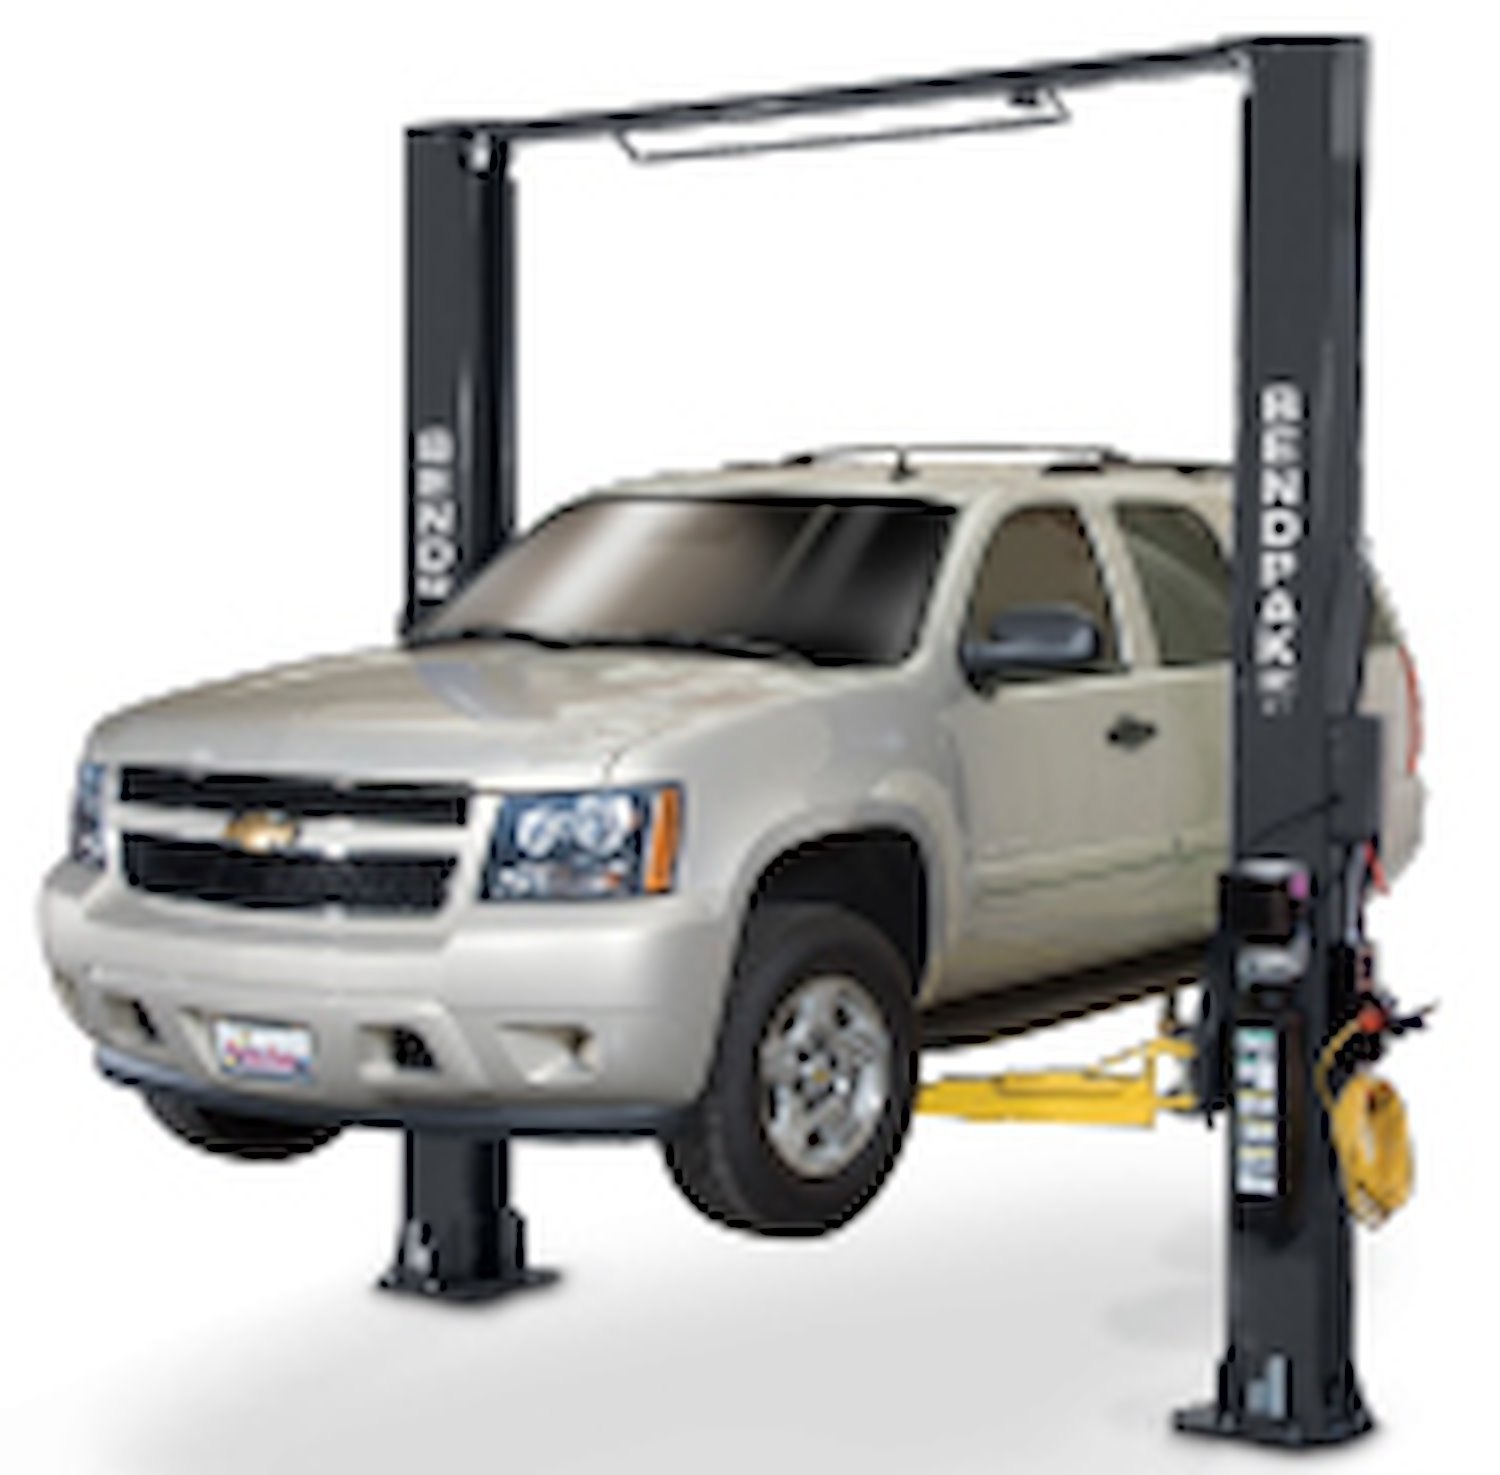 XPR-10S-LP Two-Post Lift, Low-Profile Arms, 10,000-lb. Capacity